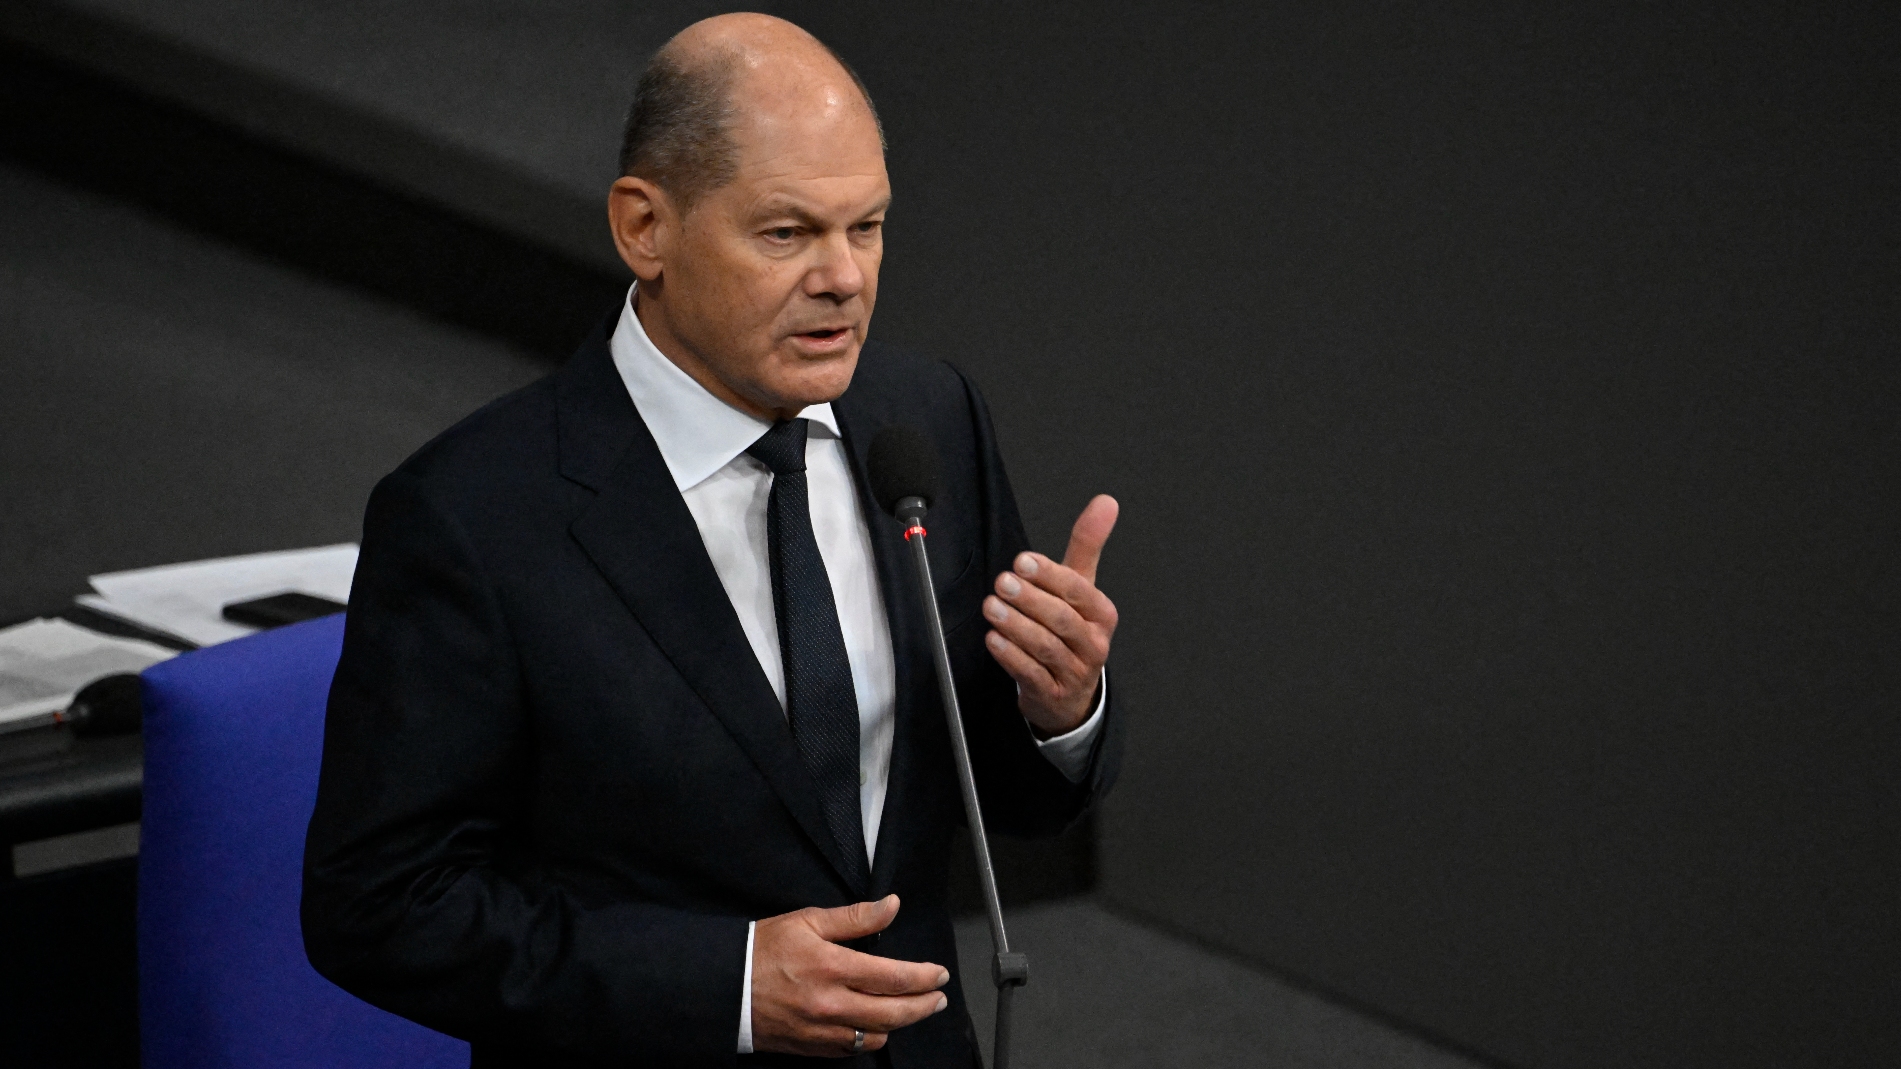 Germany's Chancellor Olaf Scholz has been under pressure to allow NATO allies to send the tanks ahead of a suspected spring offensive. /Tobias Schwarz/AFP